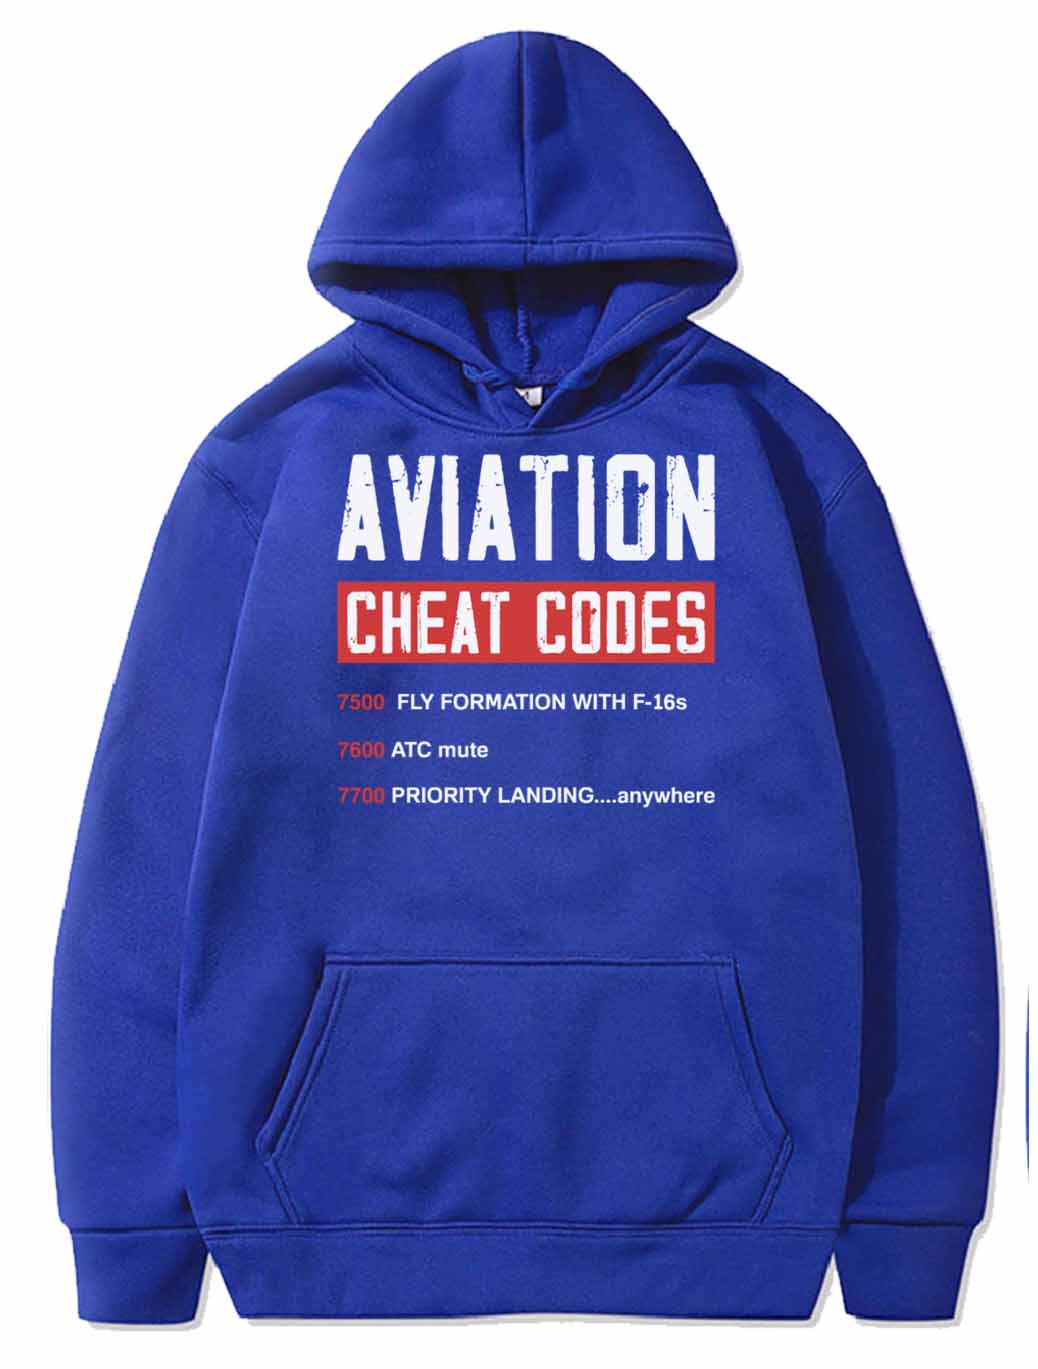 Funny Pilot Airplane Gifts Aviation Cheat Codes PULLOVER THE AV8R